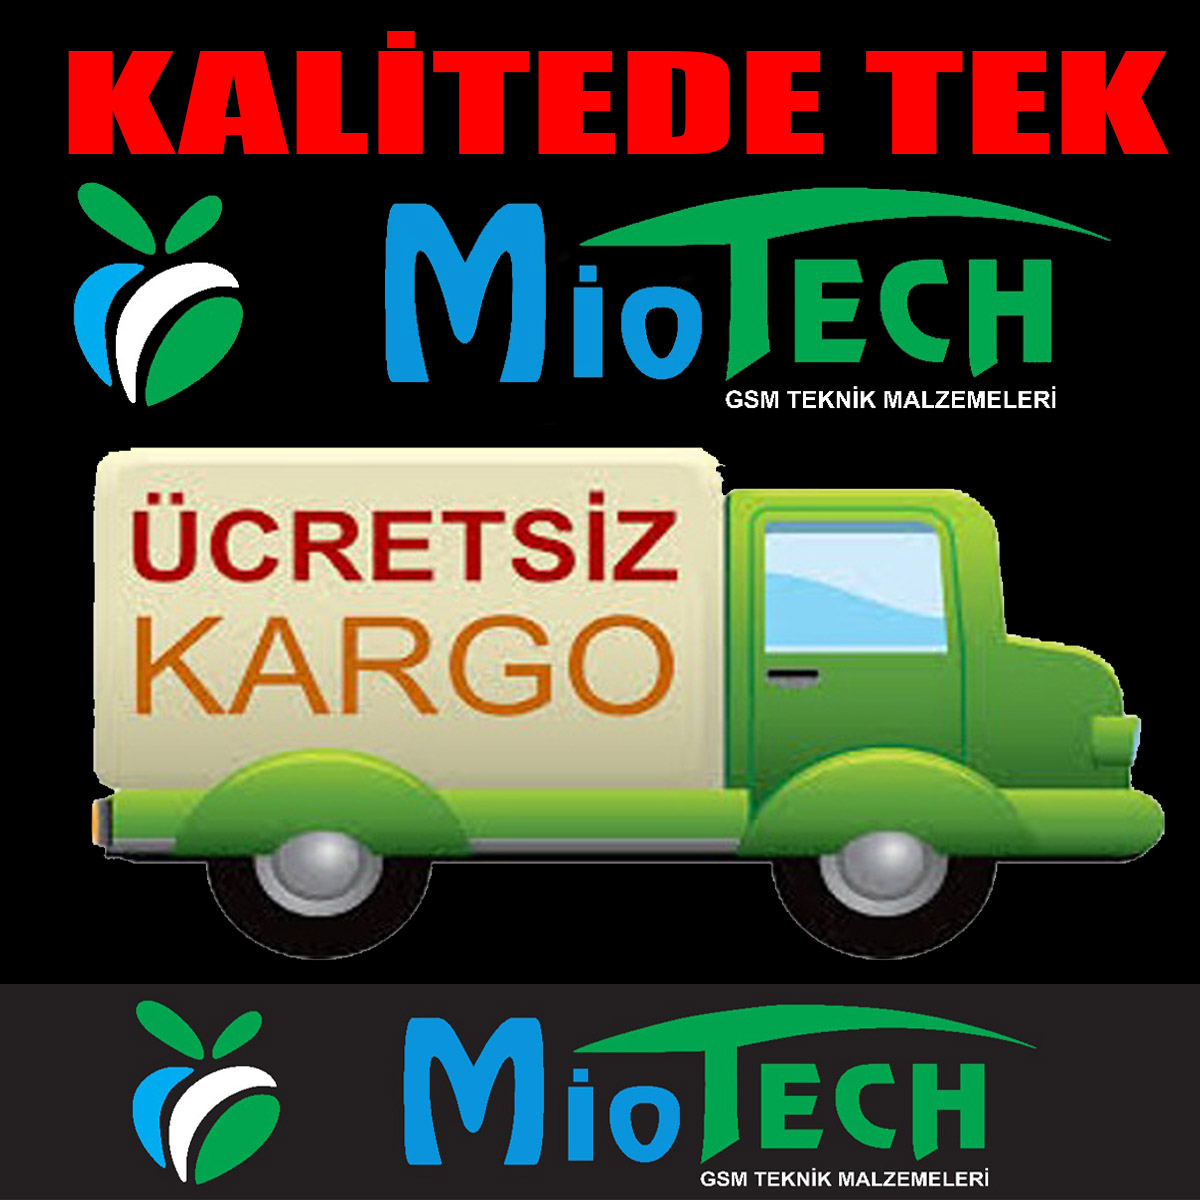 miotechh